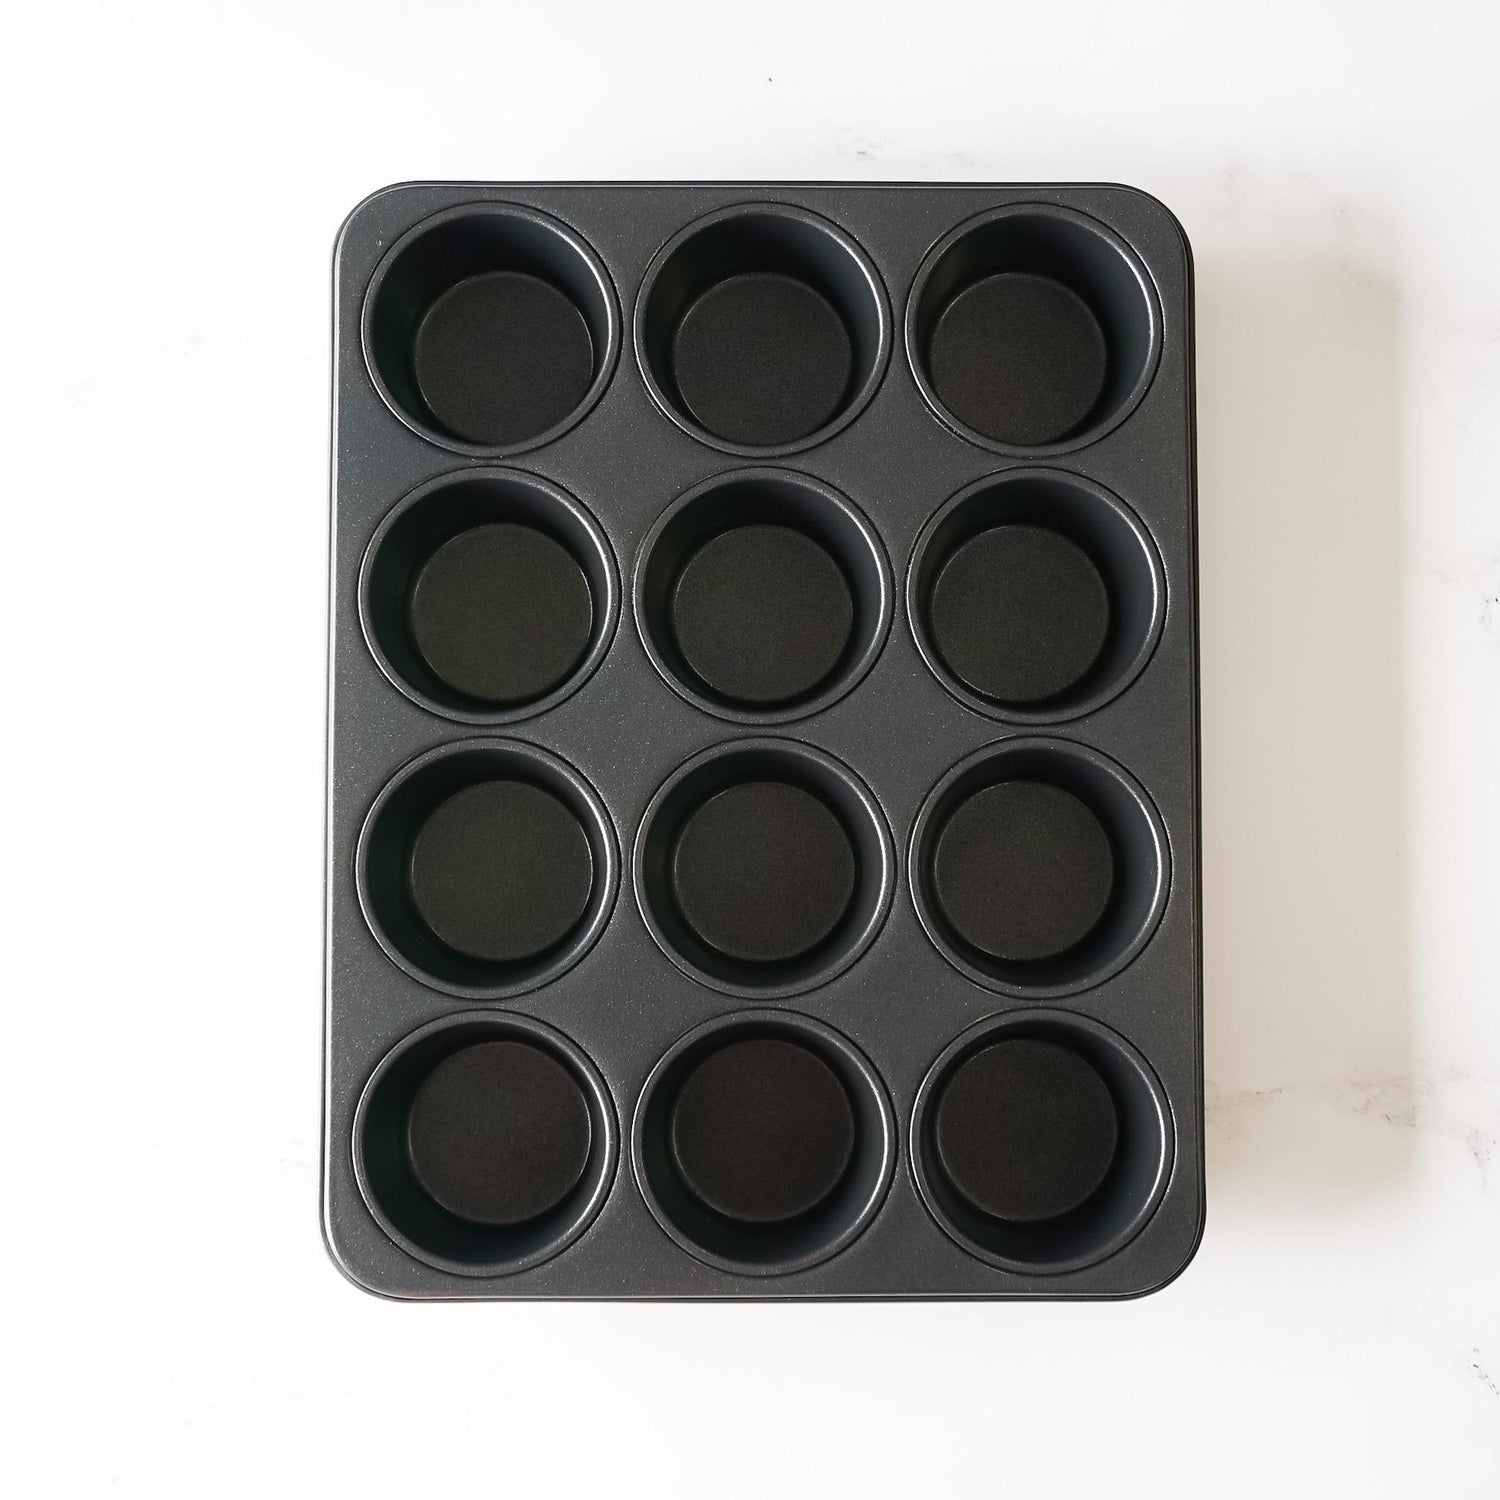 muffin and cupcake pans